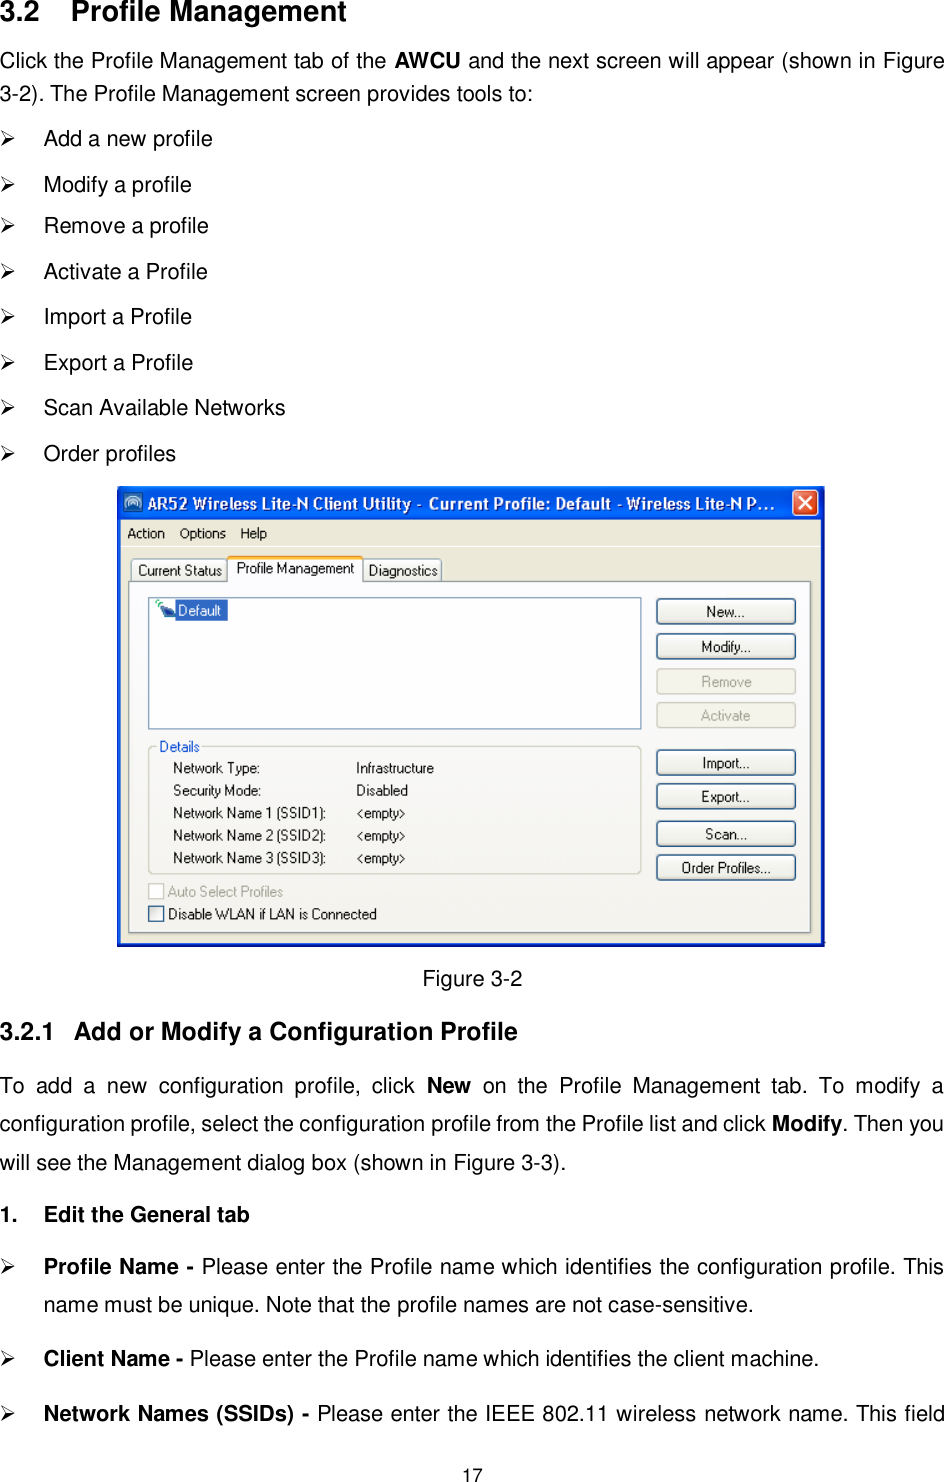  17 3.2  Profile Management Click the Profile Management tab of the AWCU and the next screen will appear (shown in XFigure 3-2X). The Profile Management screen provides tools to:   Add a new profile   Modify a profile   Remove a profile   Activate a Profile   Import a Profile   Export a Profile   Scan Available Networks   Order profiles  Figure 3-2 3.2.1  Add or Modify a Configuration Profile To  add  a  new  configuration  profile,  click  New  on  the  Profile  Management  tab.  To  modify  a configuration profile, select the configuration profile from the Profile list and click Modify. Then you will see the Management dialog box (shown in XFigure 3-3). 1.  Edit the General tab  Profile Name - Please enter the Profile name which identifies the configuration profile. This name must be unique. Note that the profile names are not case-sensitive.  Client Name - Please enter the Profile name which identifies the client machine.  Network Names (SSIDs) - Please enter the IEEE 802.11 wireless network name. This field 